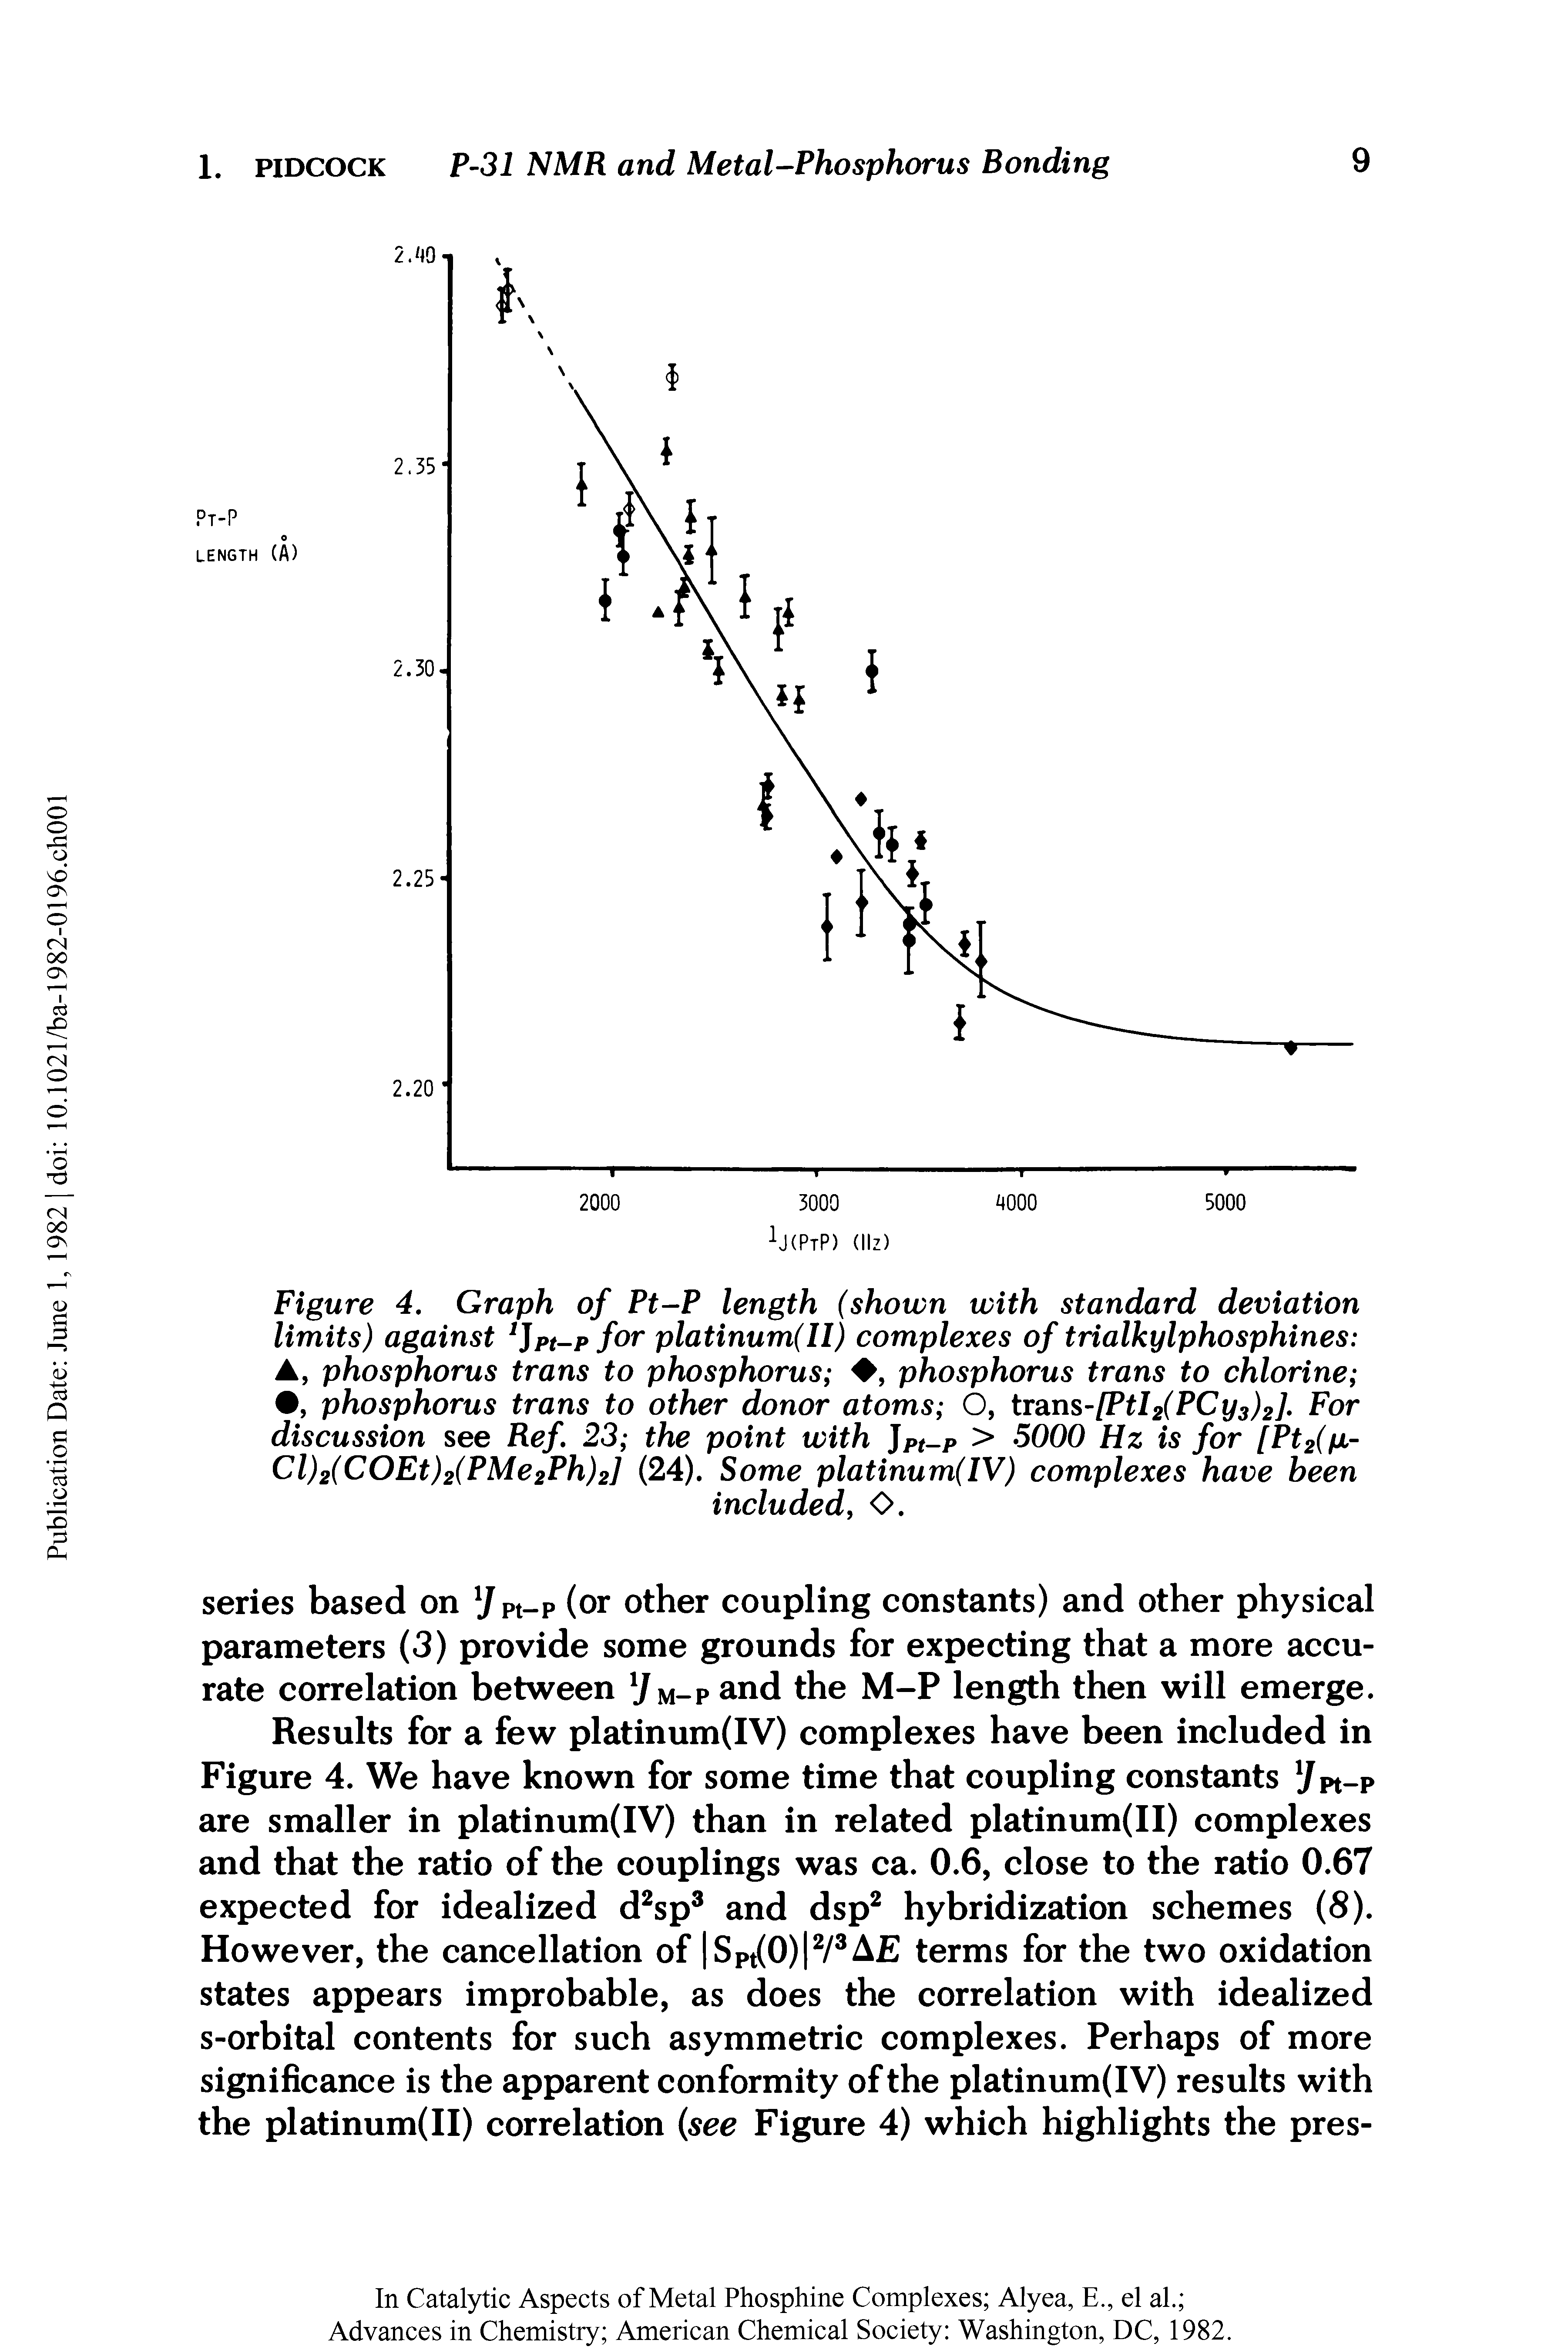 Figure 4. Graph of Pt-P length (shown with standard deviation limits) against 2]pt-p for platinum(II) complexes of trialkylphosphines , phosphorus trans to phosphorus , phosphorus trans to chlorine , phosphorus trans to other donor atoms O, trans-[Ptl2(PCy3)2], For discussion see Ref. 23 the point with JPt-P > 5000 Hz is for [Pt2(p-Cl)2(COEt)2(PMe2Ph)2] (24). Some platinum(IV) complexes have been...